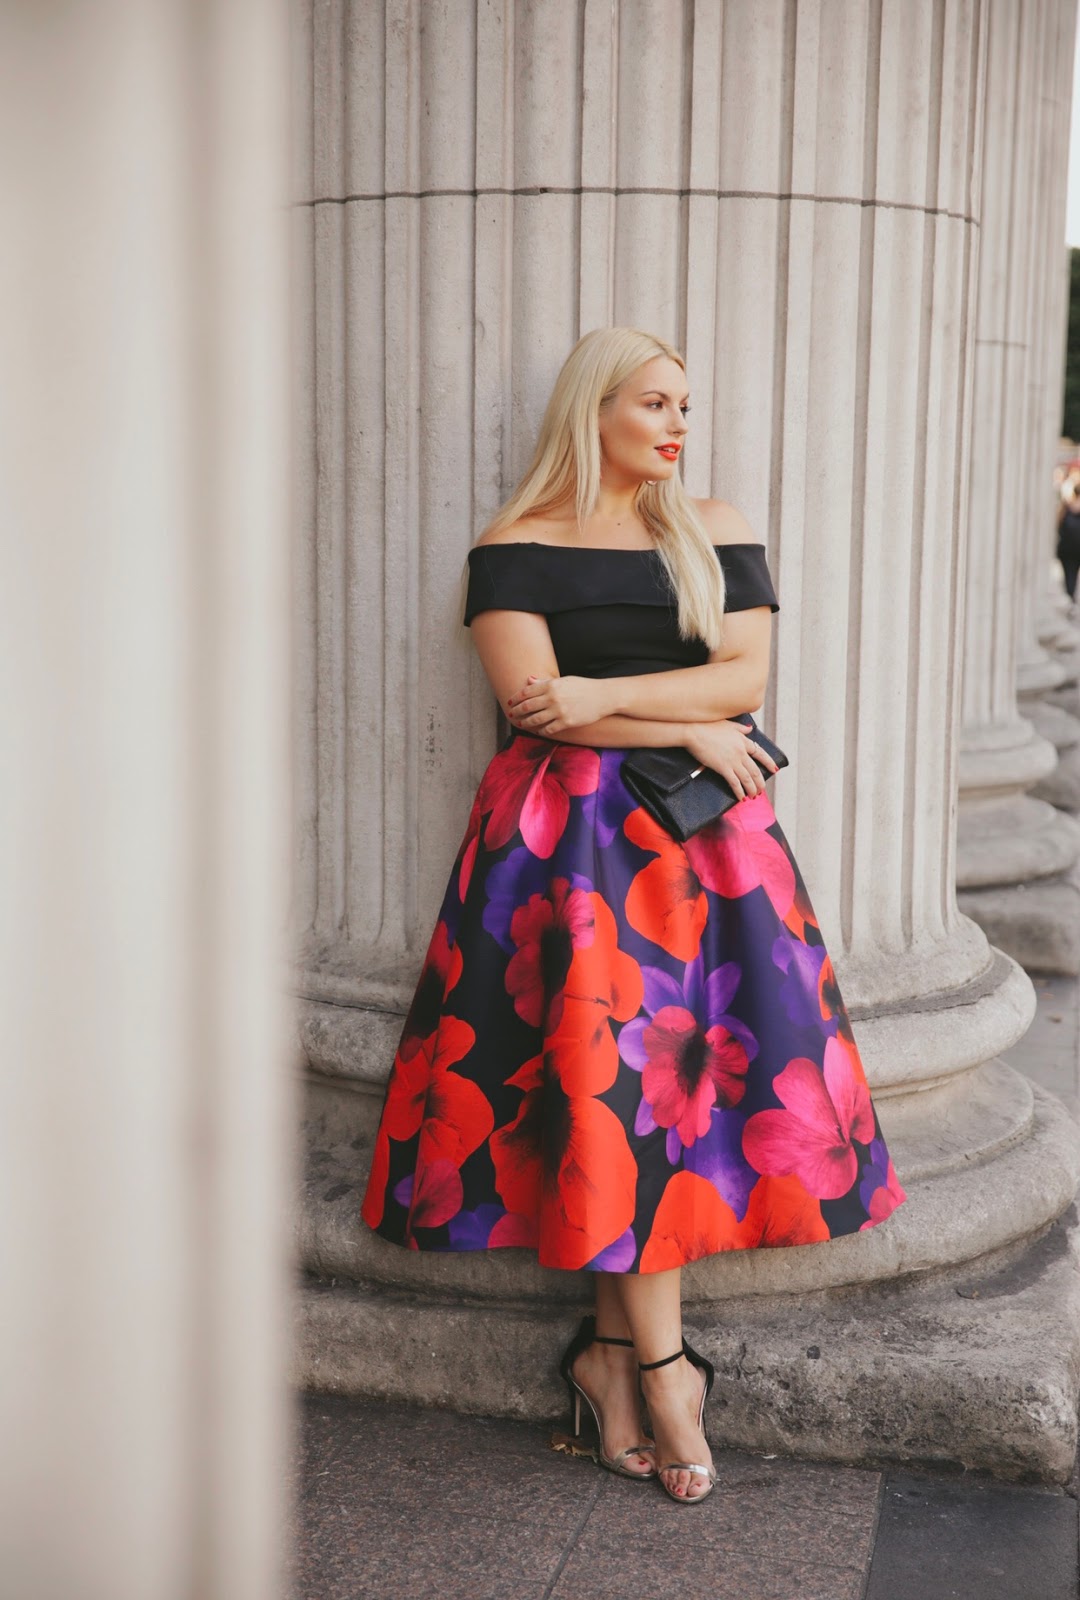 Occasion Wear Fashion Ideas For Now Through To Winter - Style Me Curvy